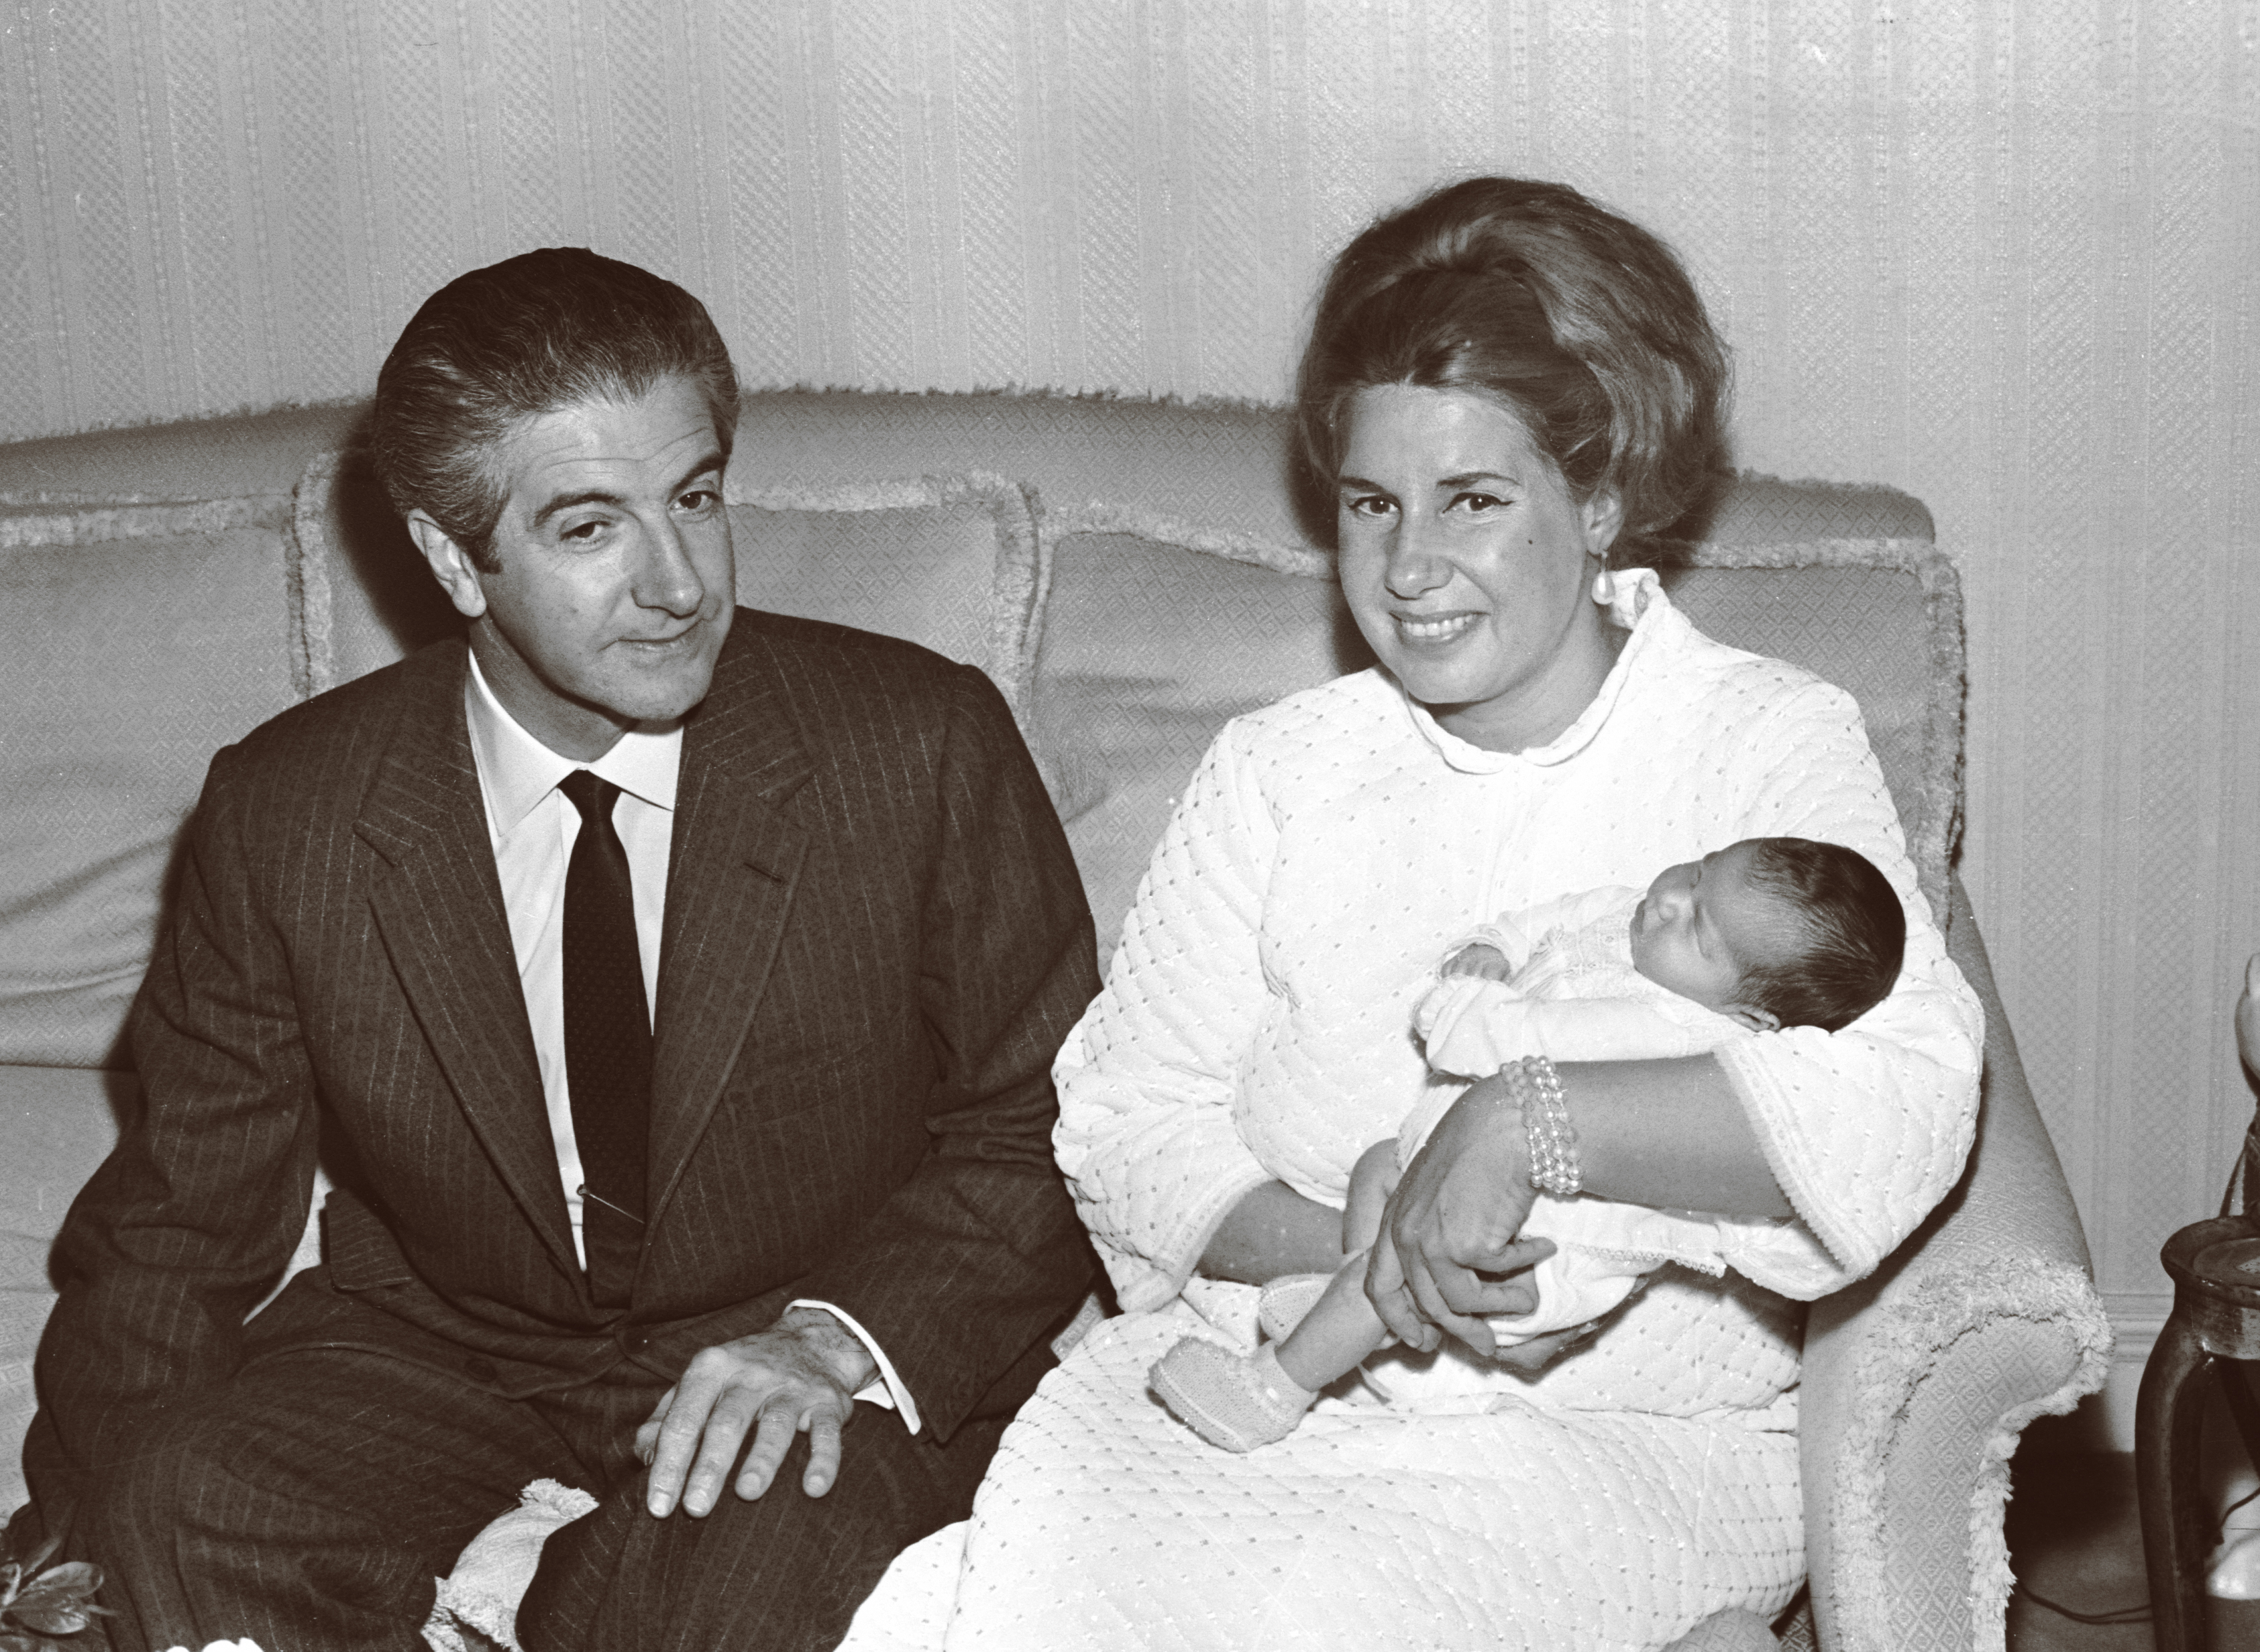 The Duchess of Alba, Maria del Rosario Cayetana Fitz-James-Stuart and Luis Martinez de Irujo y Artacoz with their daughter in 1968. | Source: Getty Images